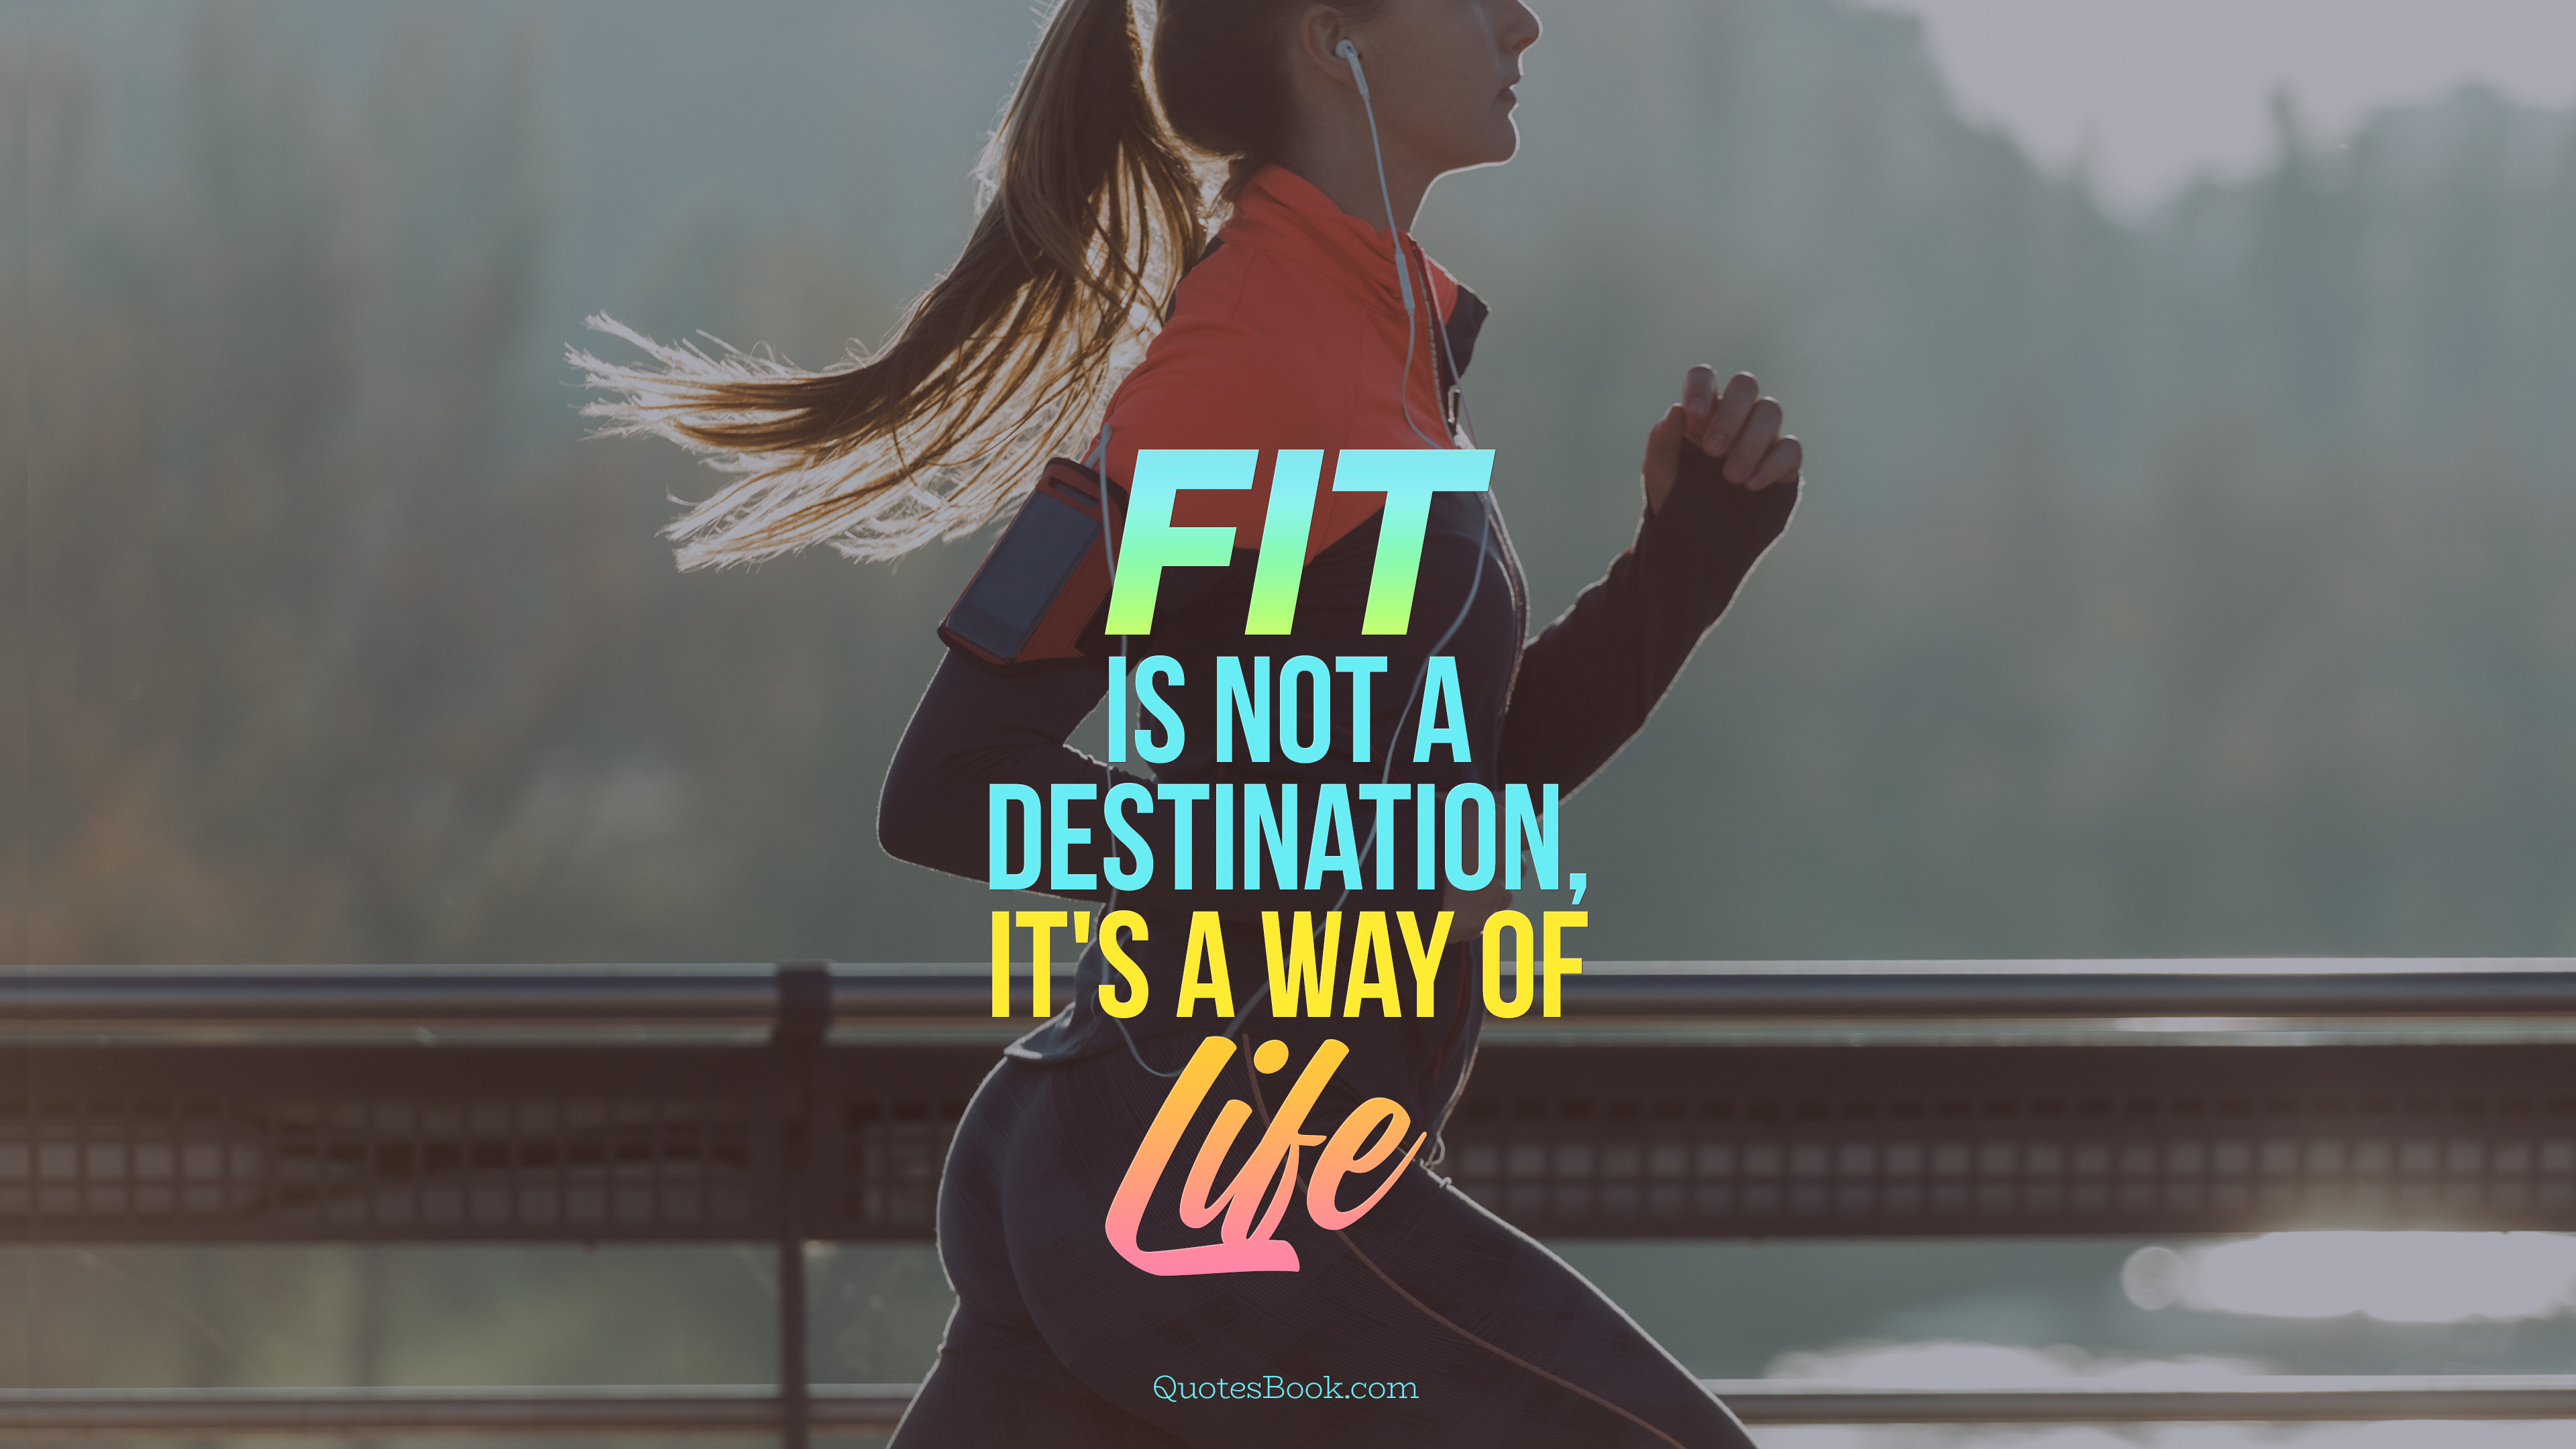 Fit is not a destination, it is a way of life - QuotesBook